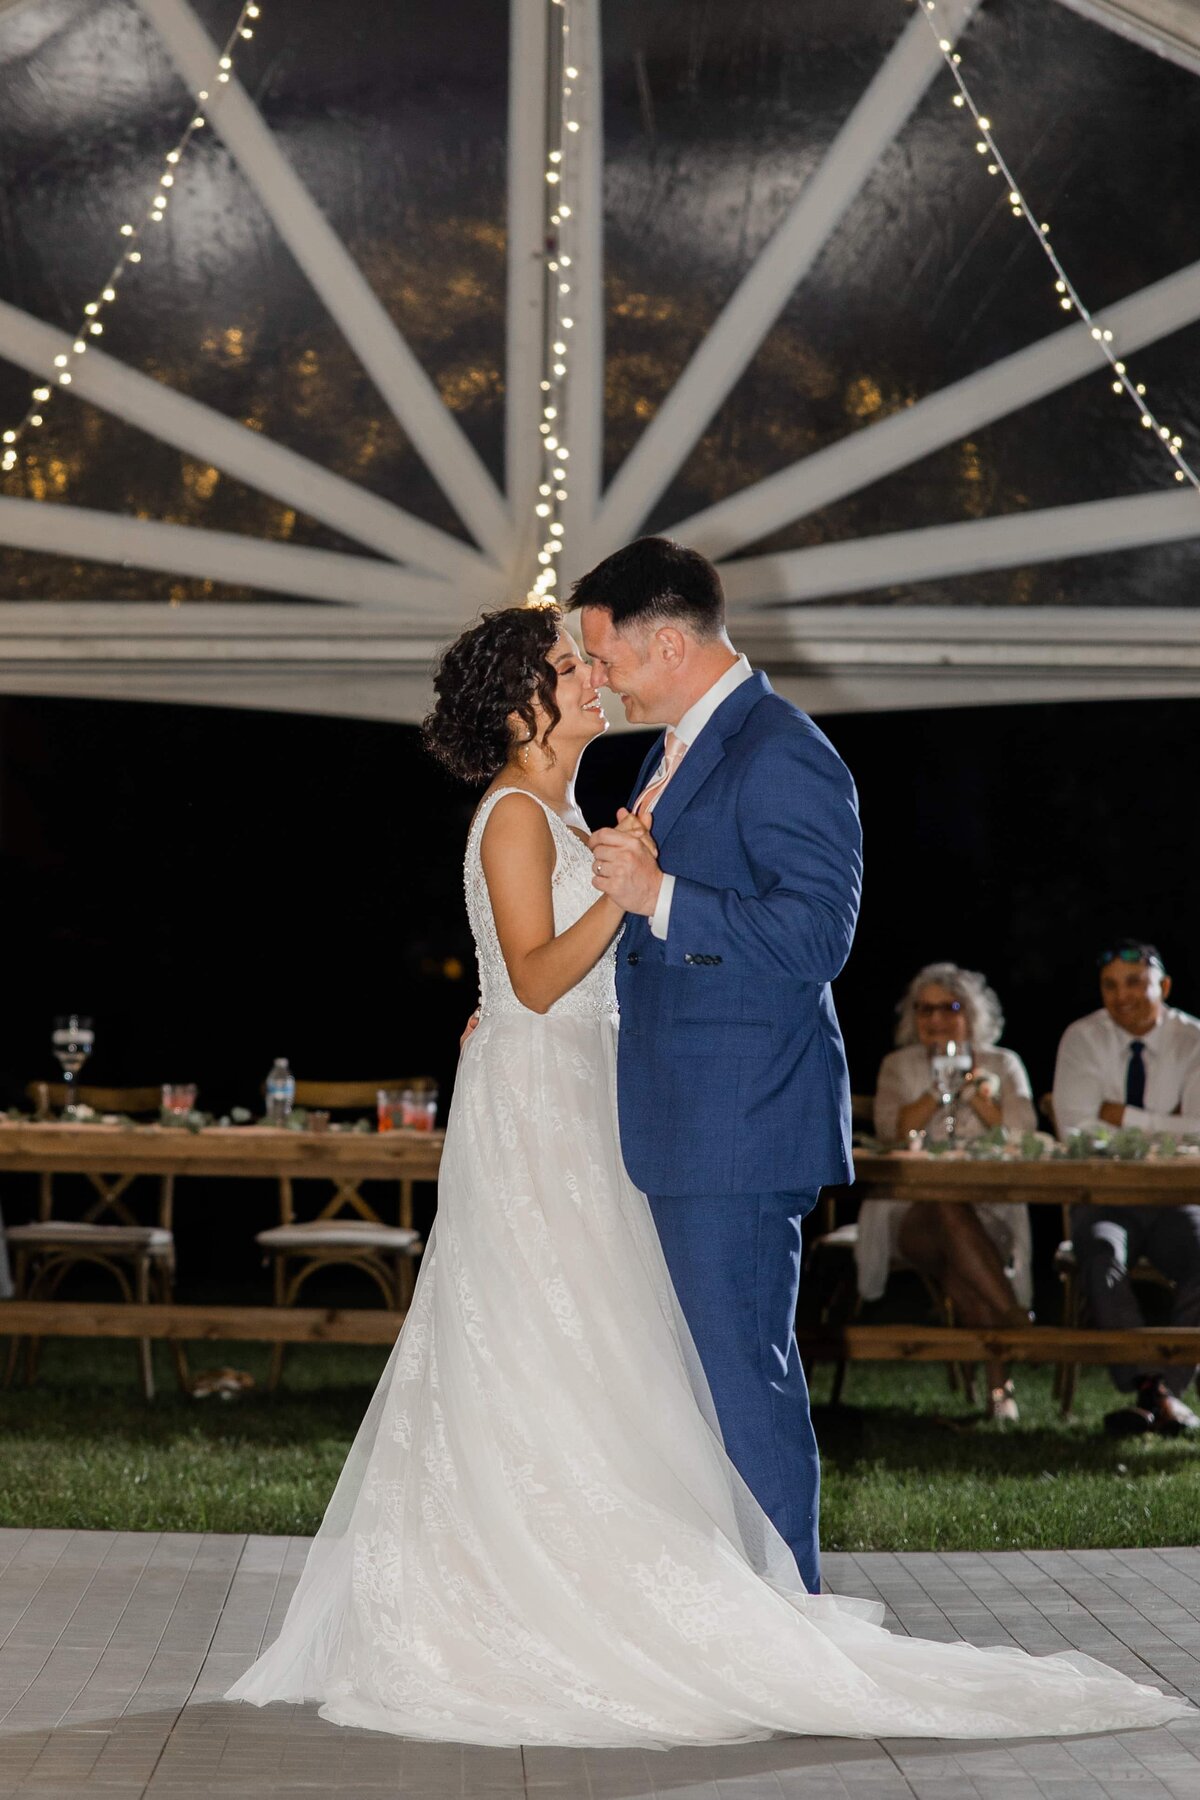 A bride and groom share a romantic dance under a tent with string lights at an Iowa wedding, with guests watching in the background.